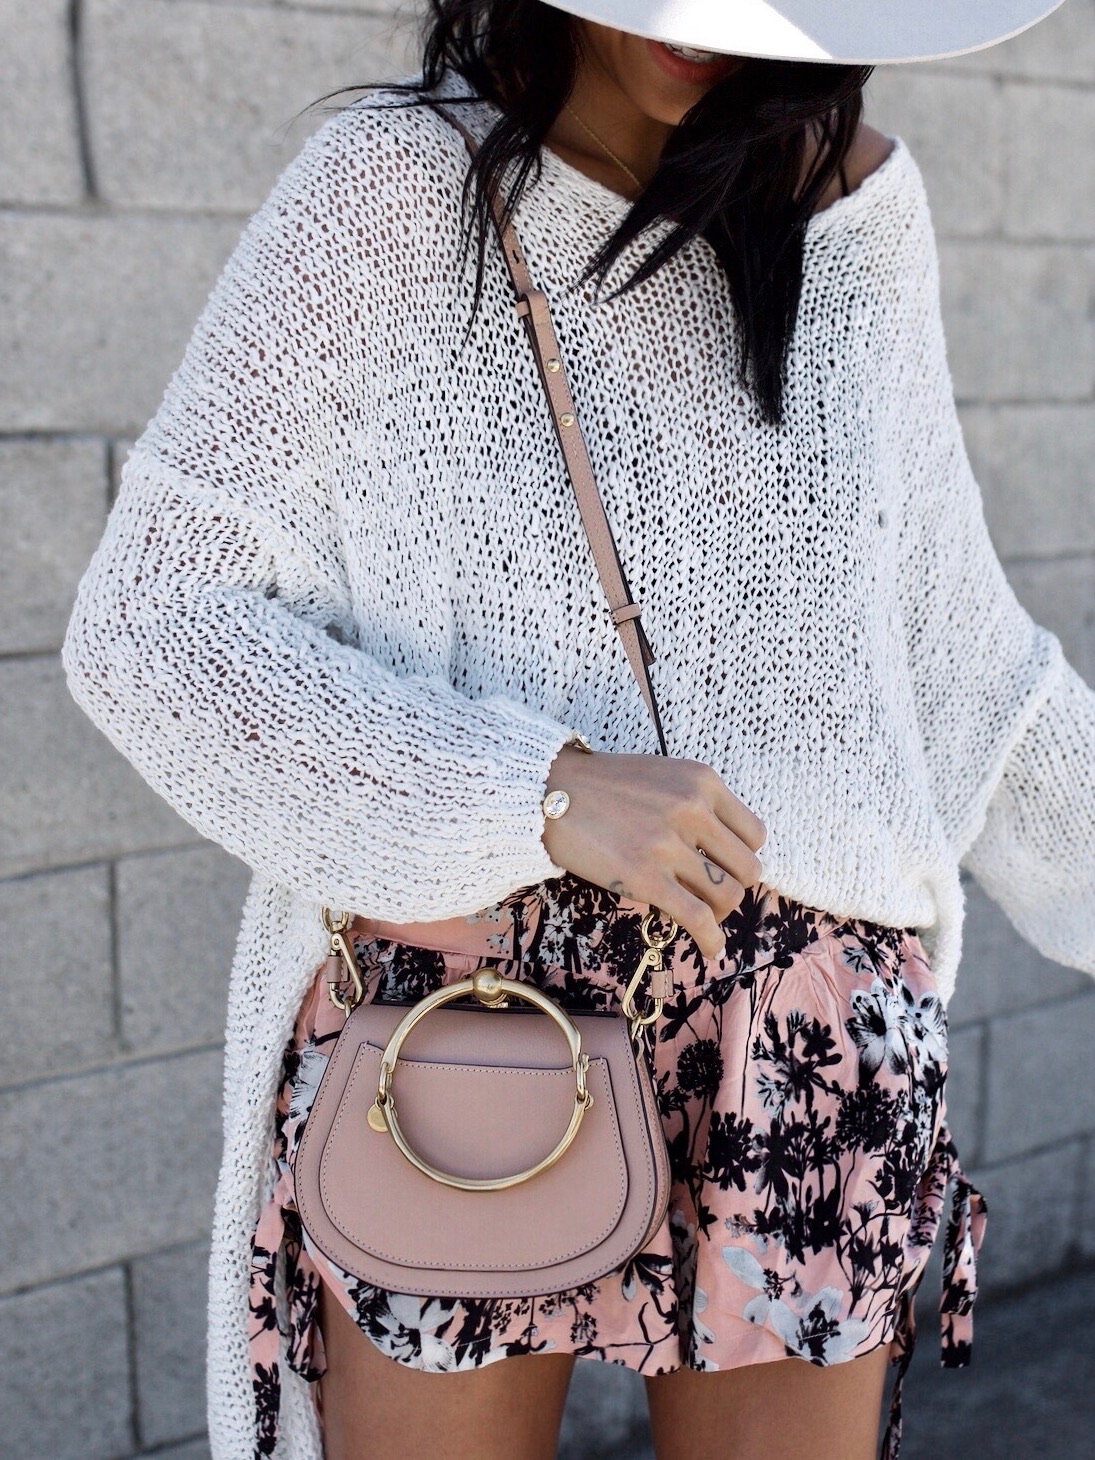 What to Wear in Spring | Chloe Nile Bag | Free People Sweater